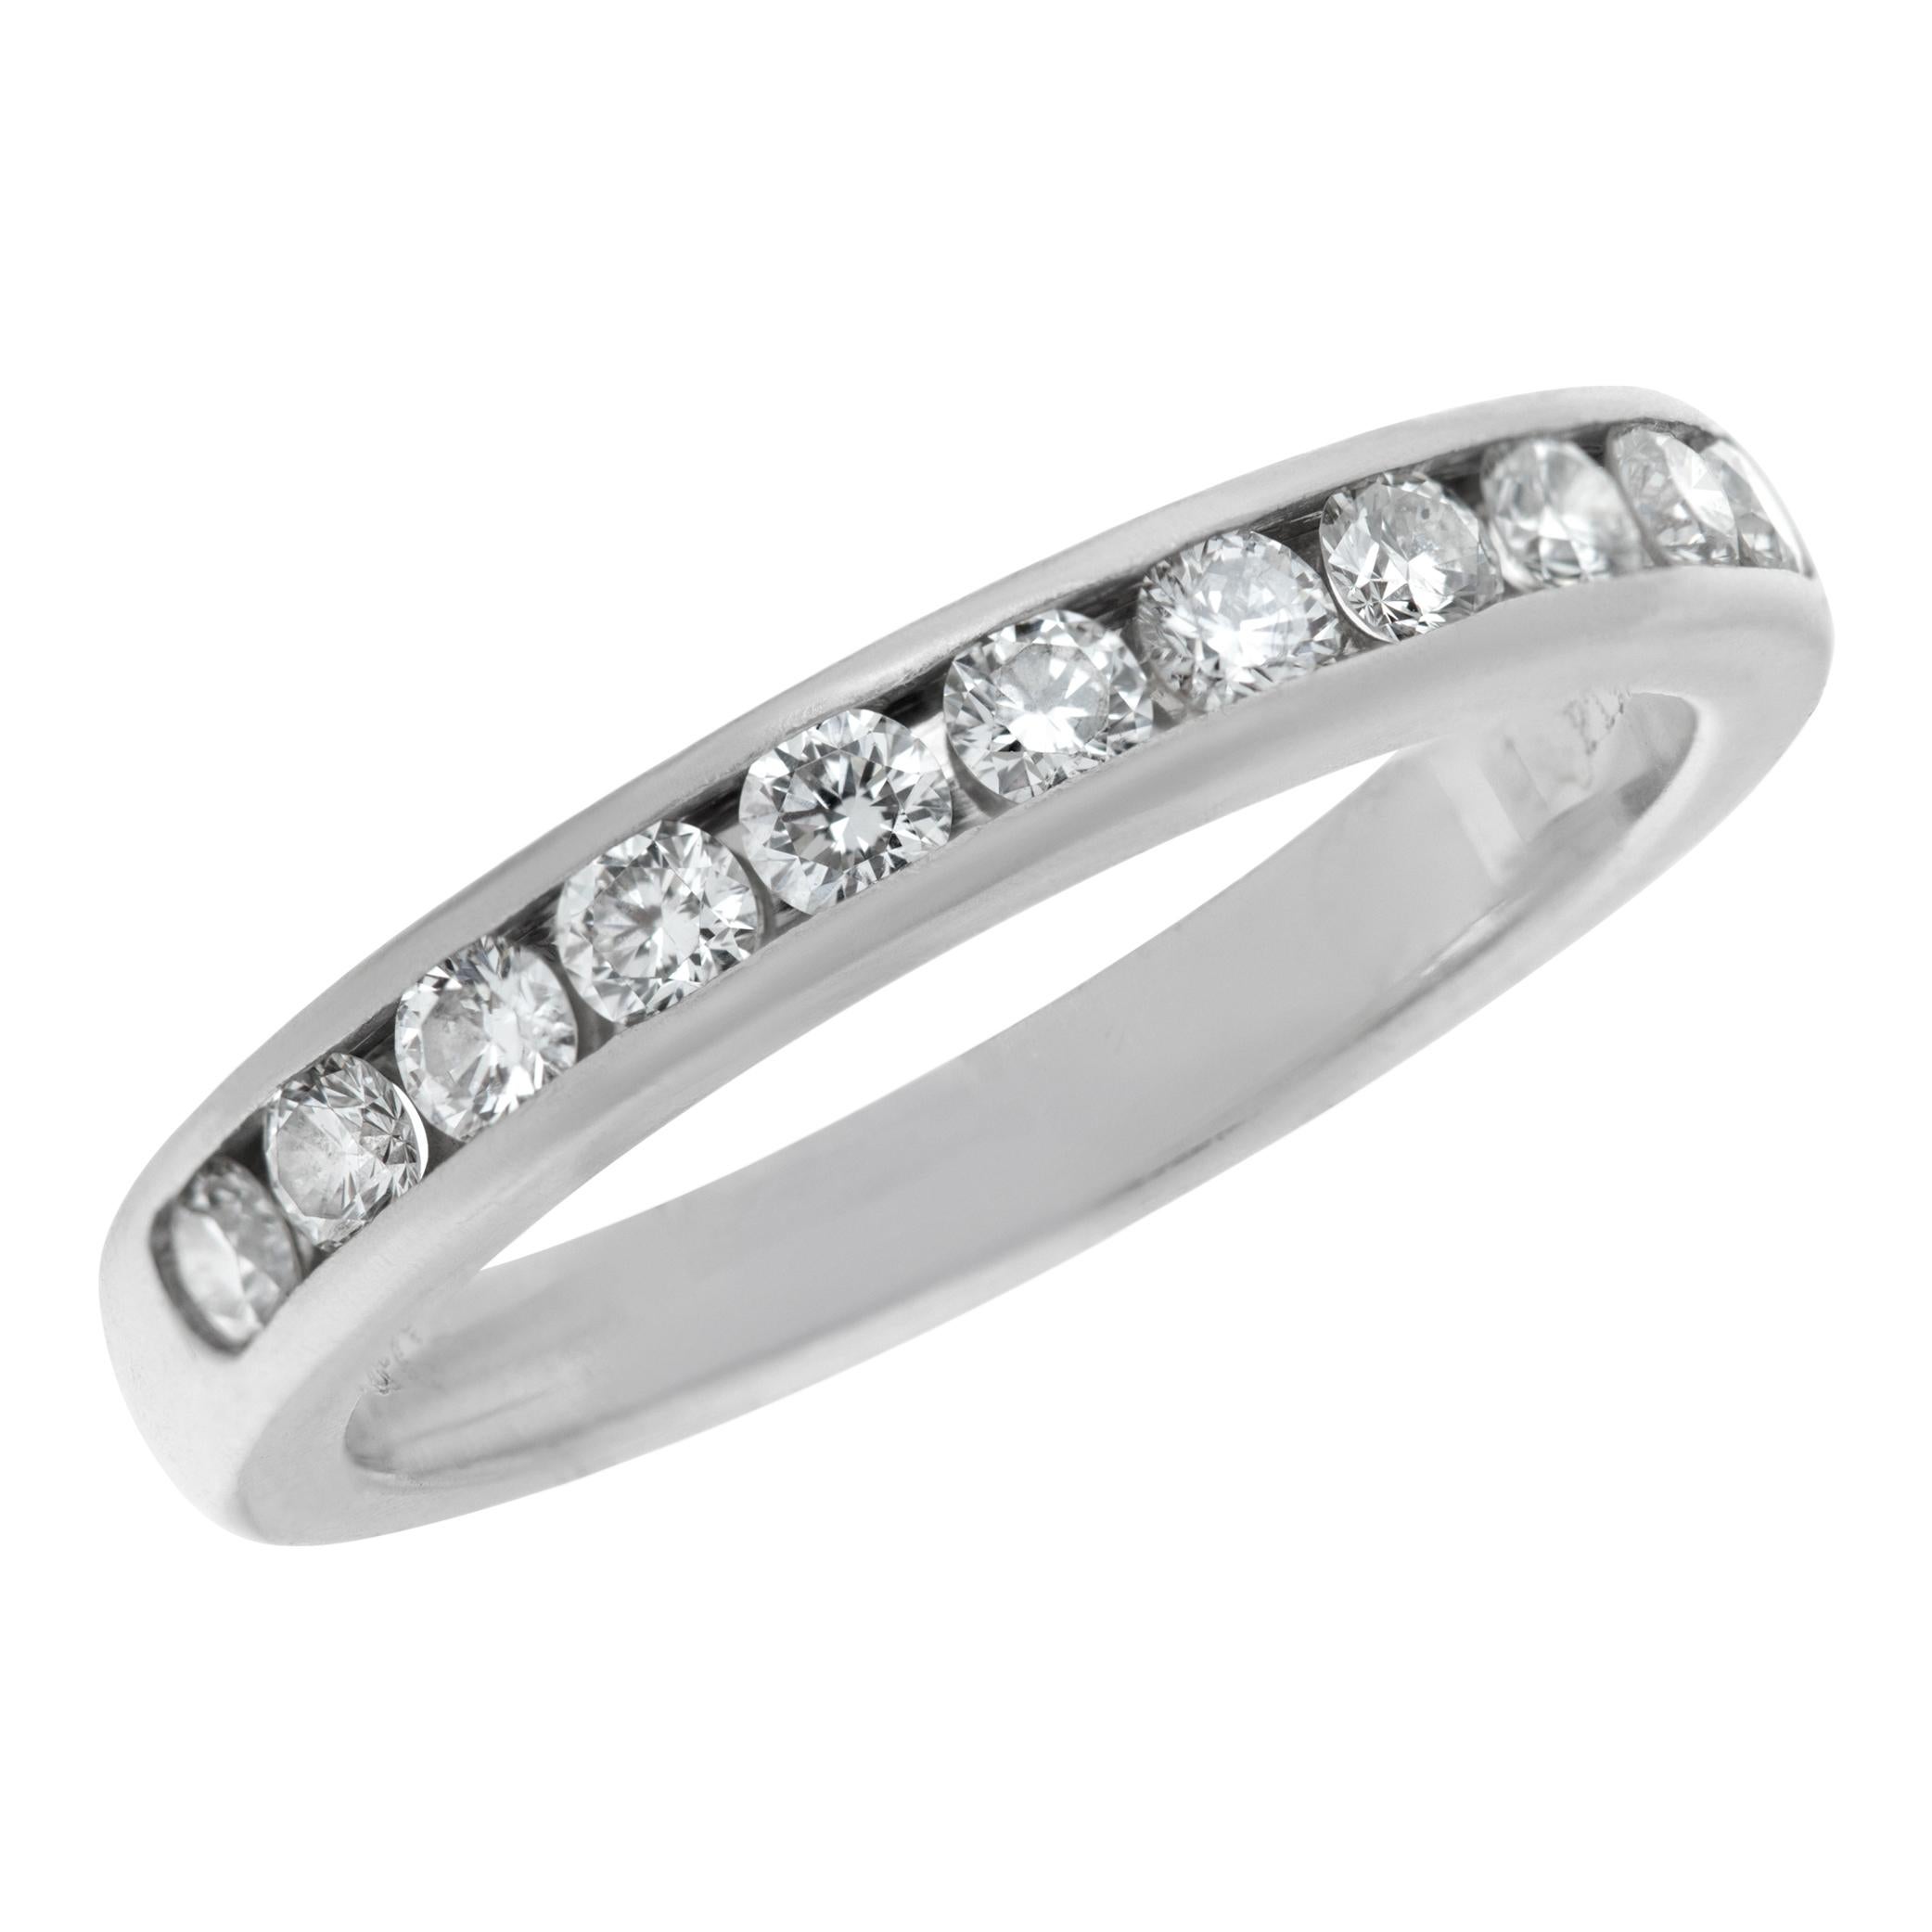 Tiffany & Co. diamond wedding band in platinum with a half-circle of diamonds In Excellent Condition For Sale In Surfside, FL